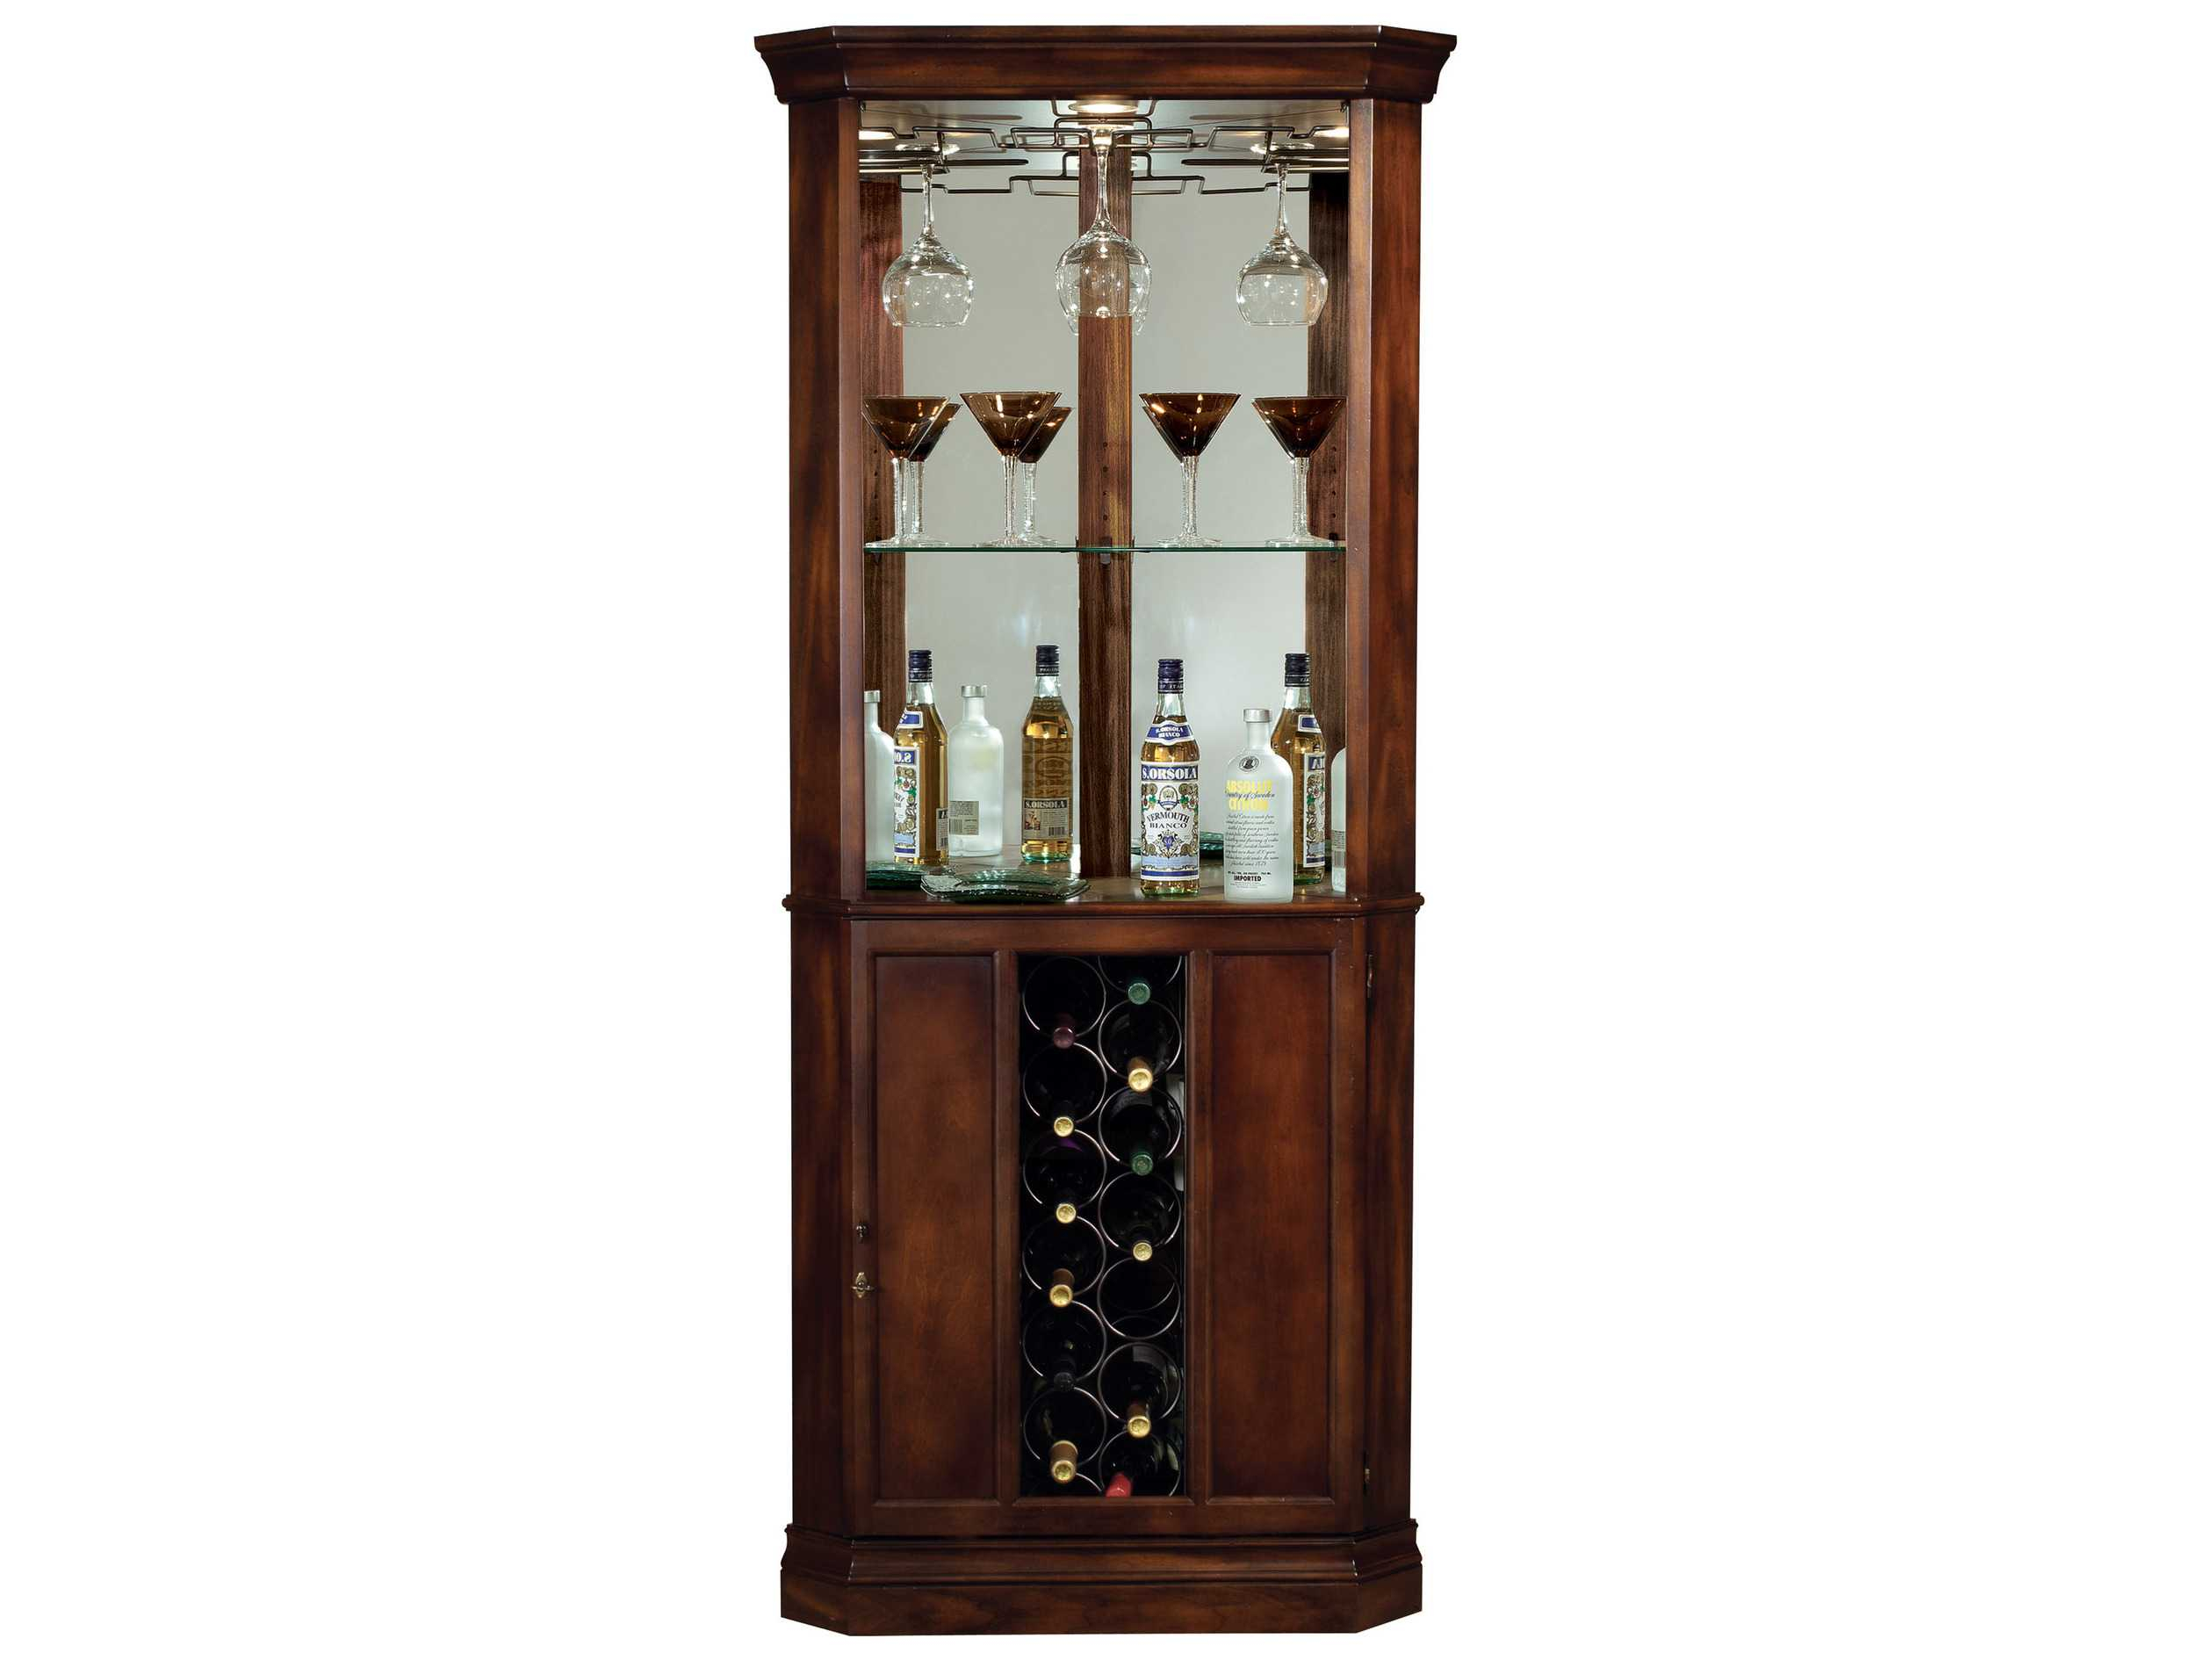 Howard Miller Piedmont Rustic Cherry Wine Bar Cabinet with regard to sizing 2519 X 1890